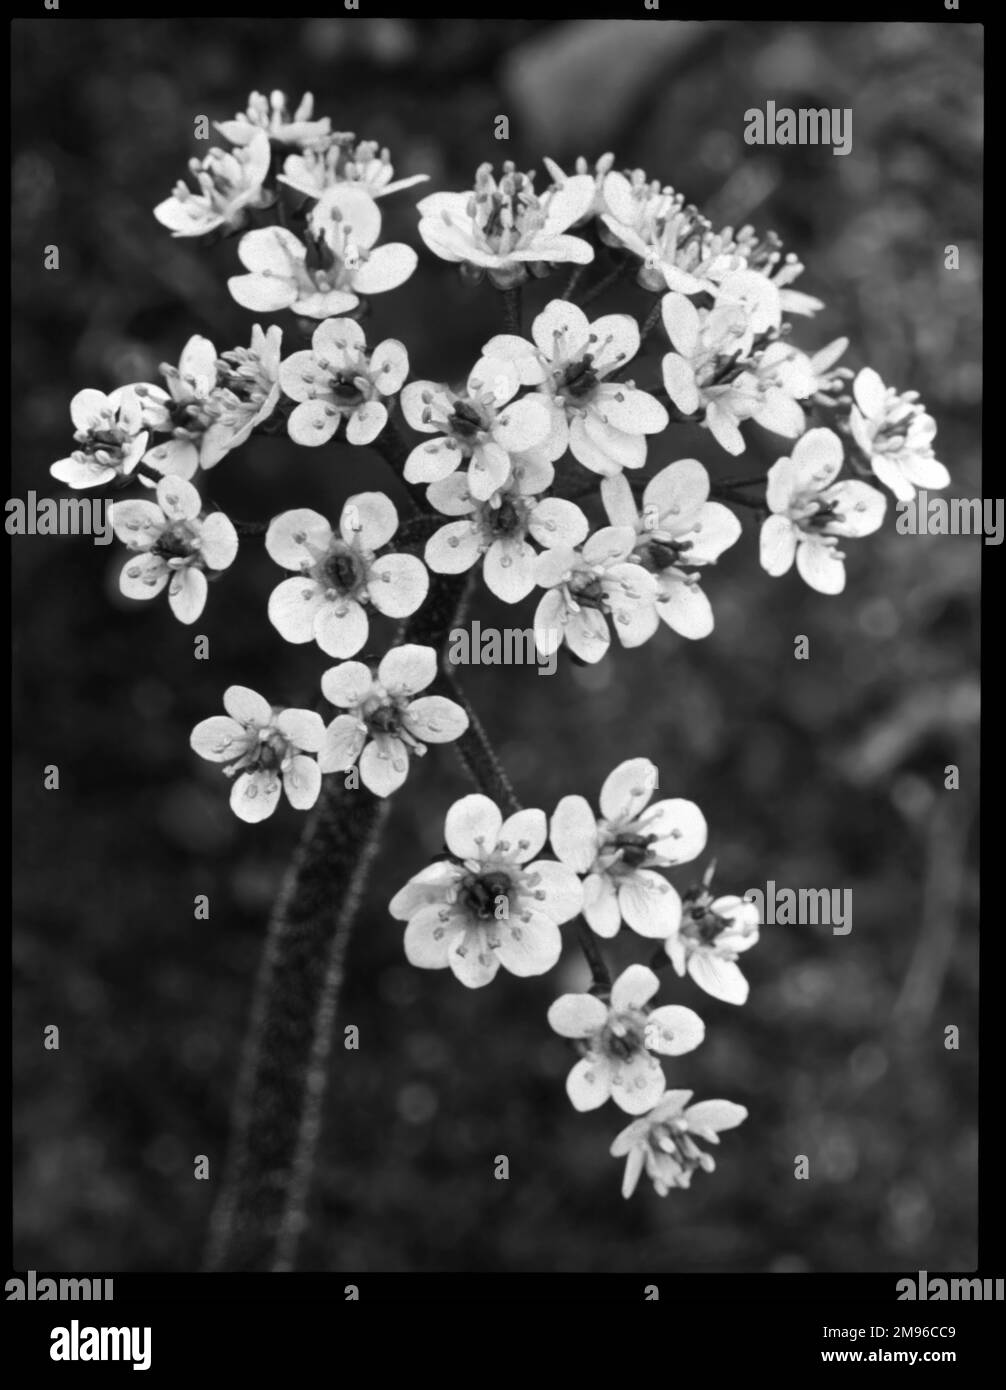 Saxifraga Peltata (Umbrella Plant), a plant of the Saxifragaceae family (commonly known as saxifrages or stone breakers because of their ability to grow in the cracks between rocks). Stock Photo